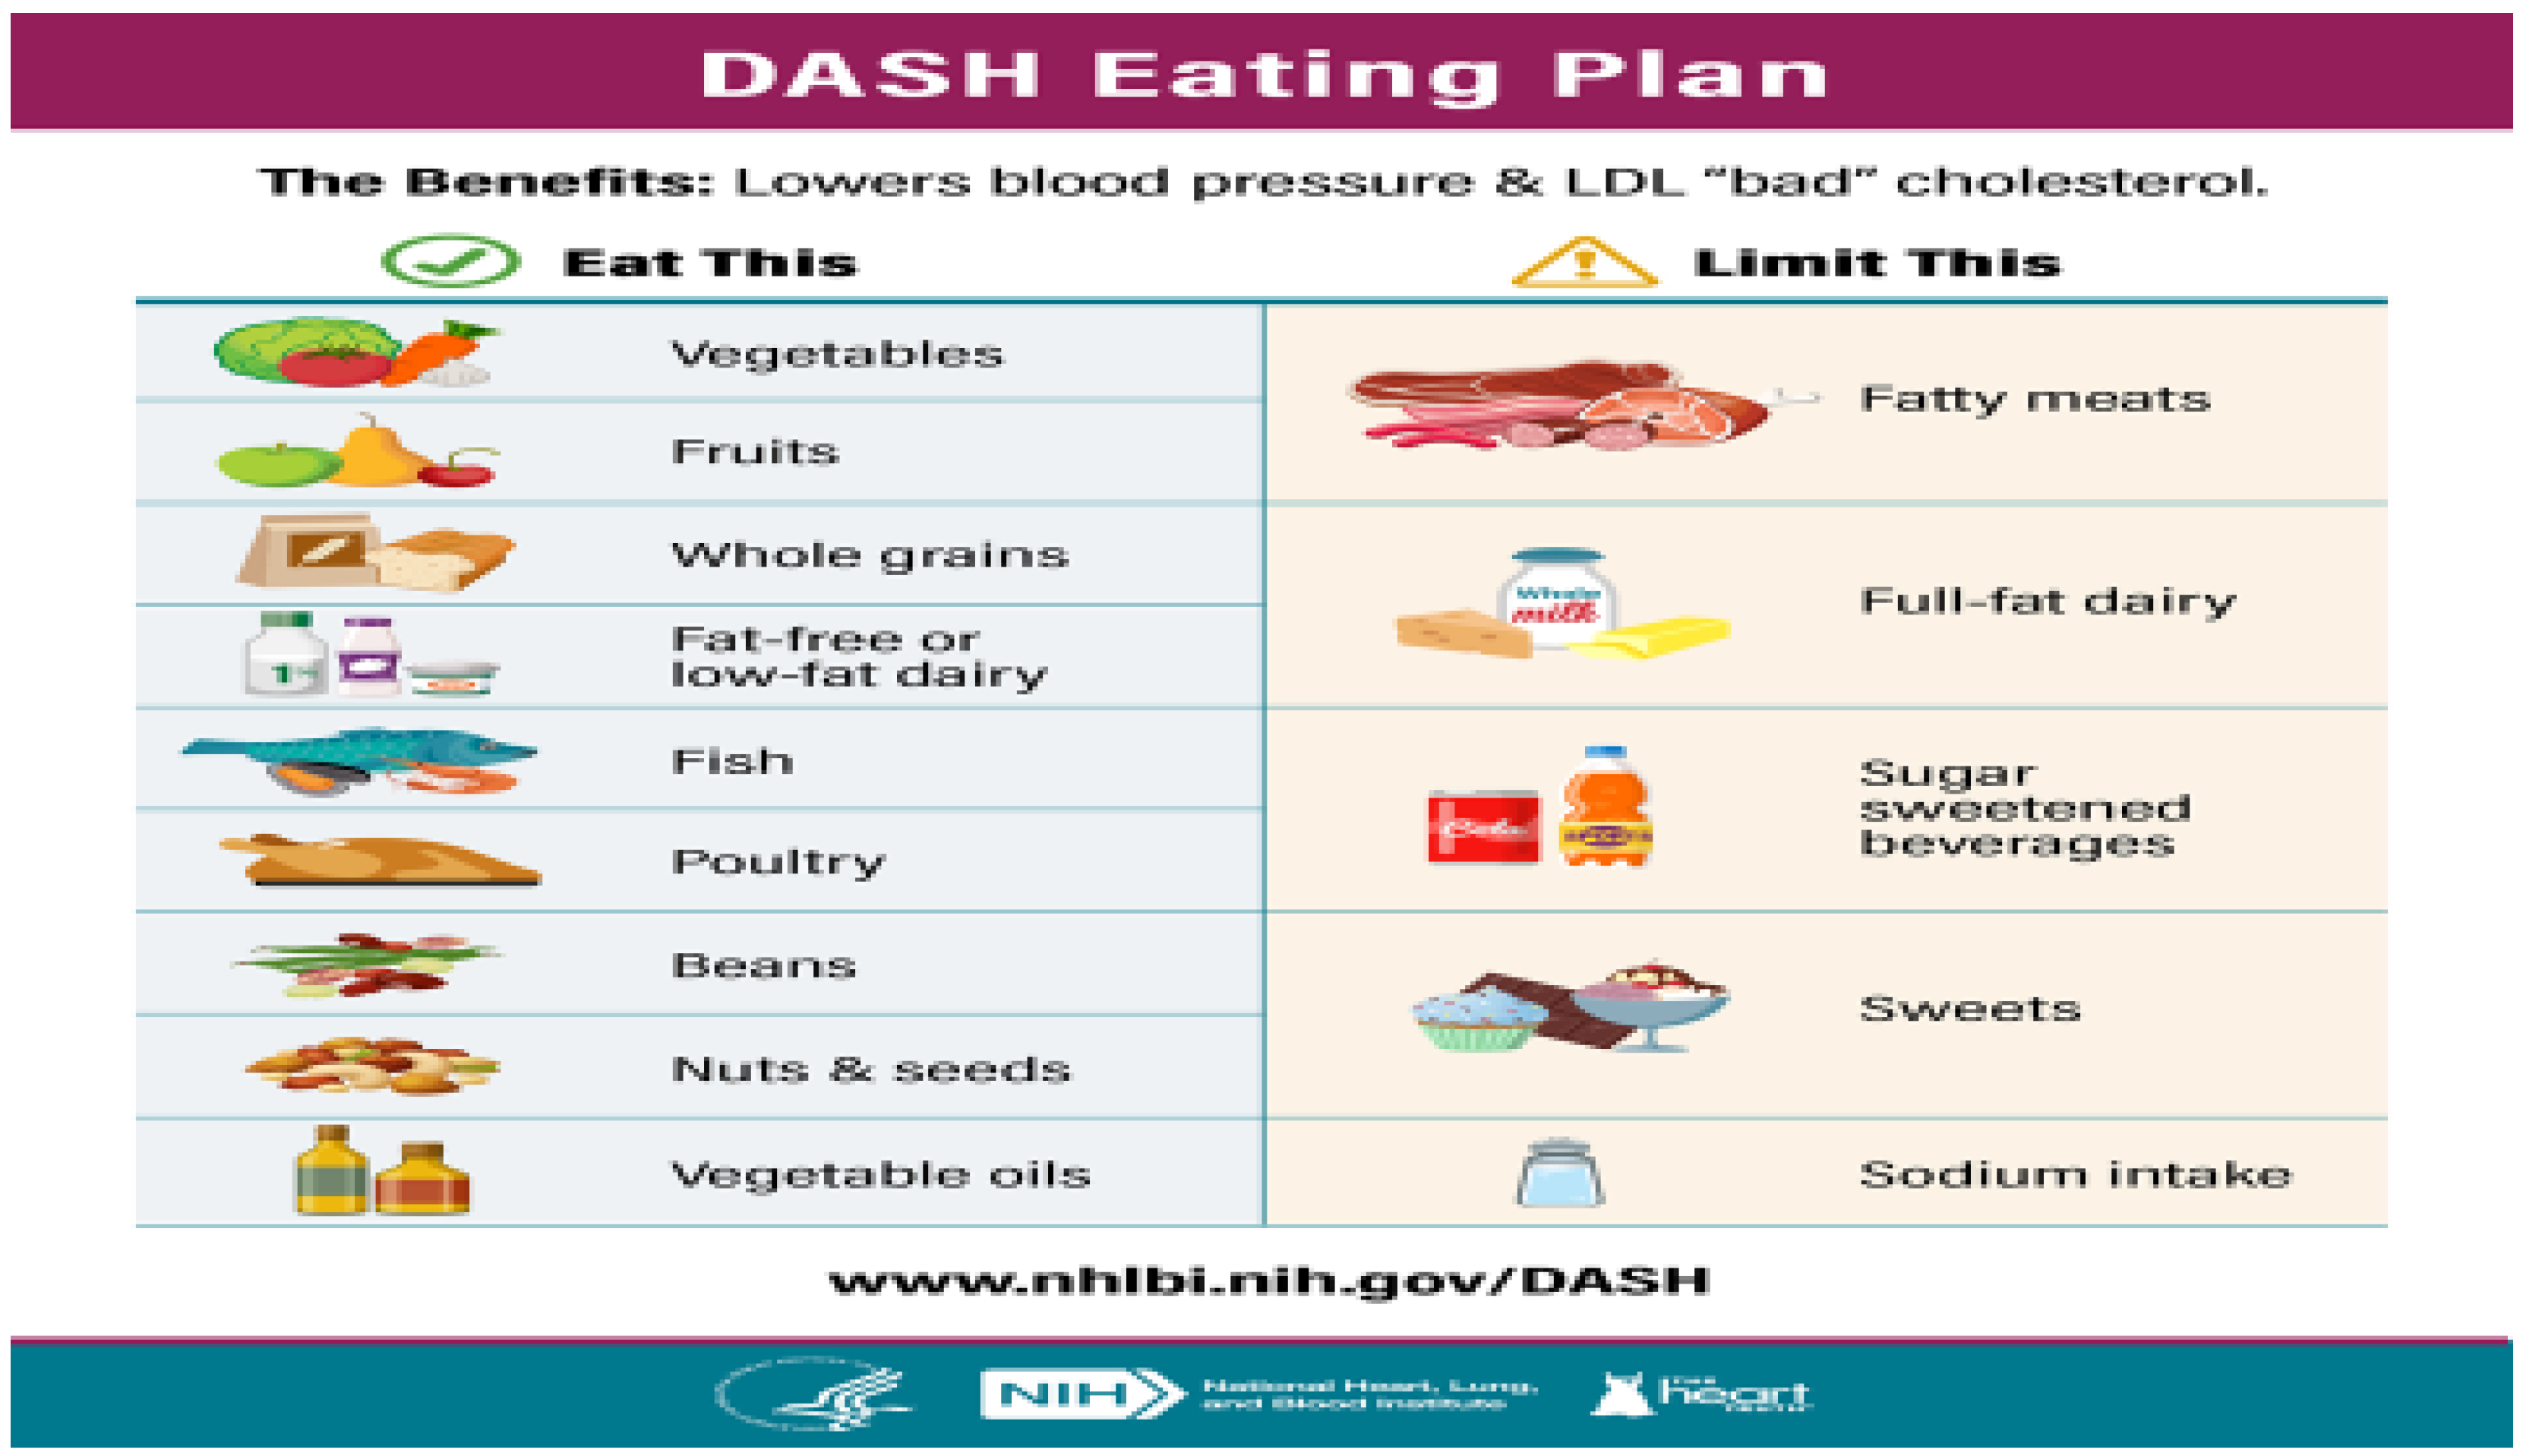 Lowering Your Blood Pressure with the DASH Eating Plan